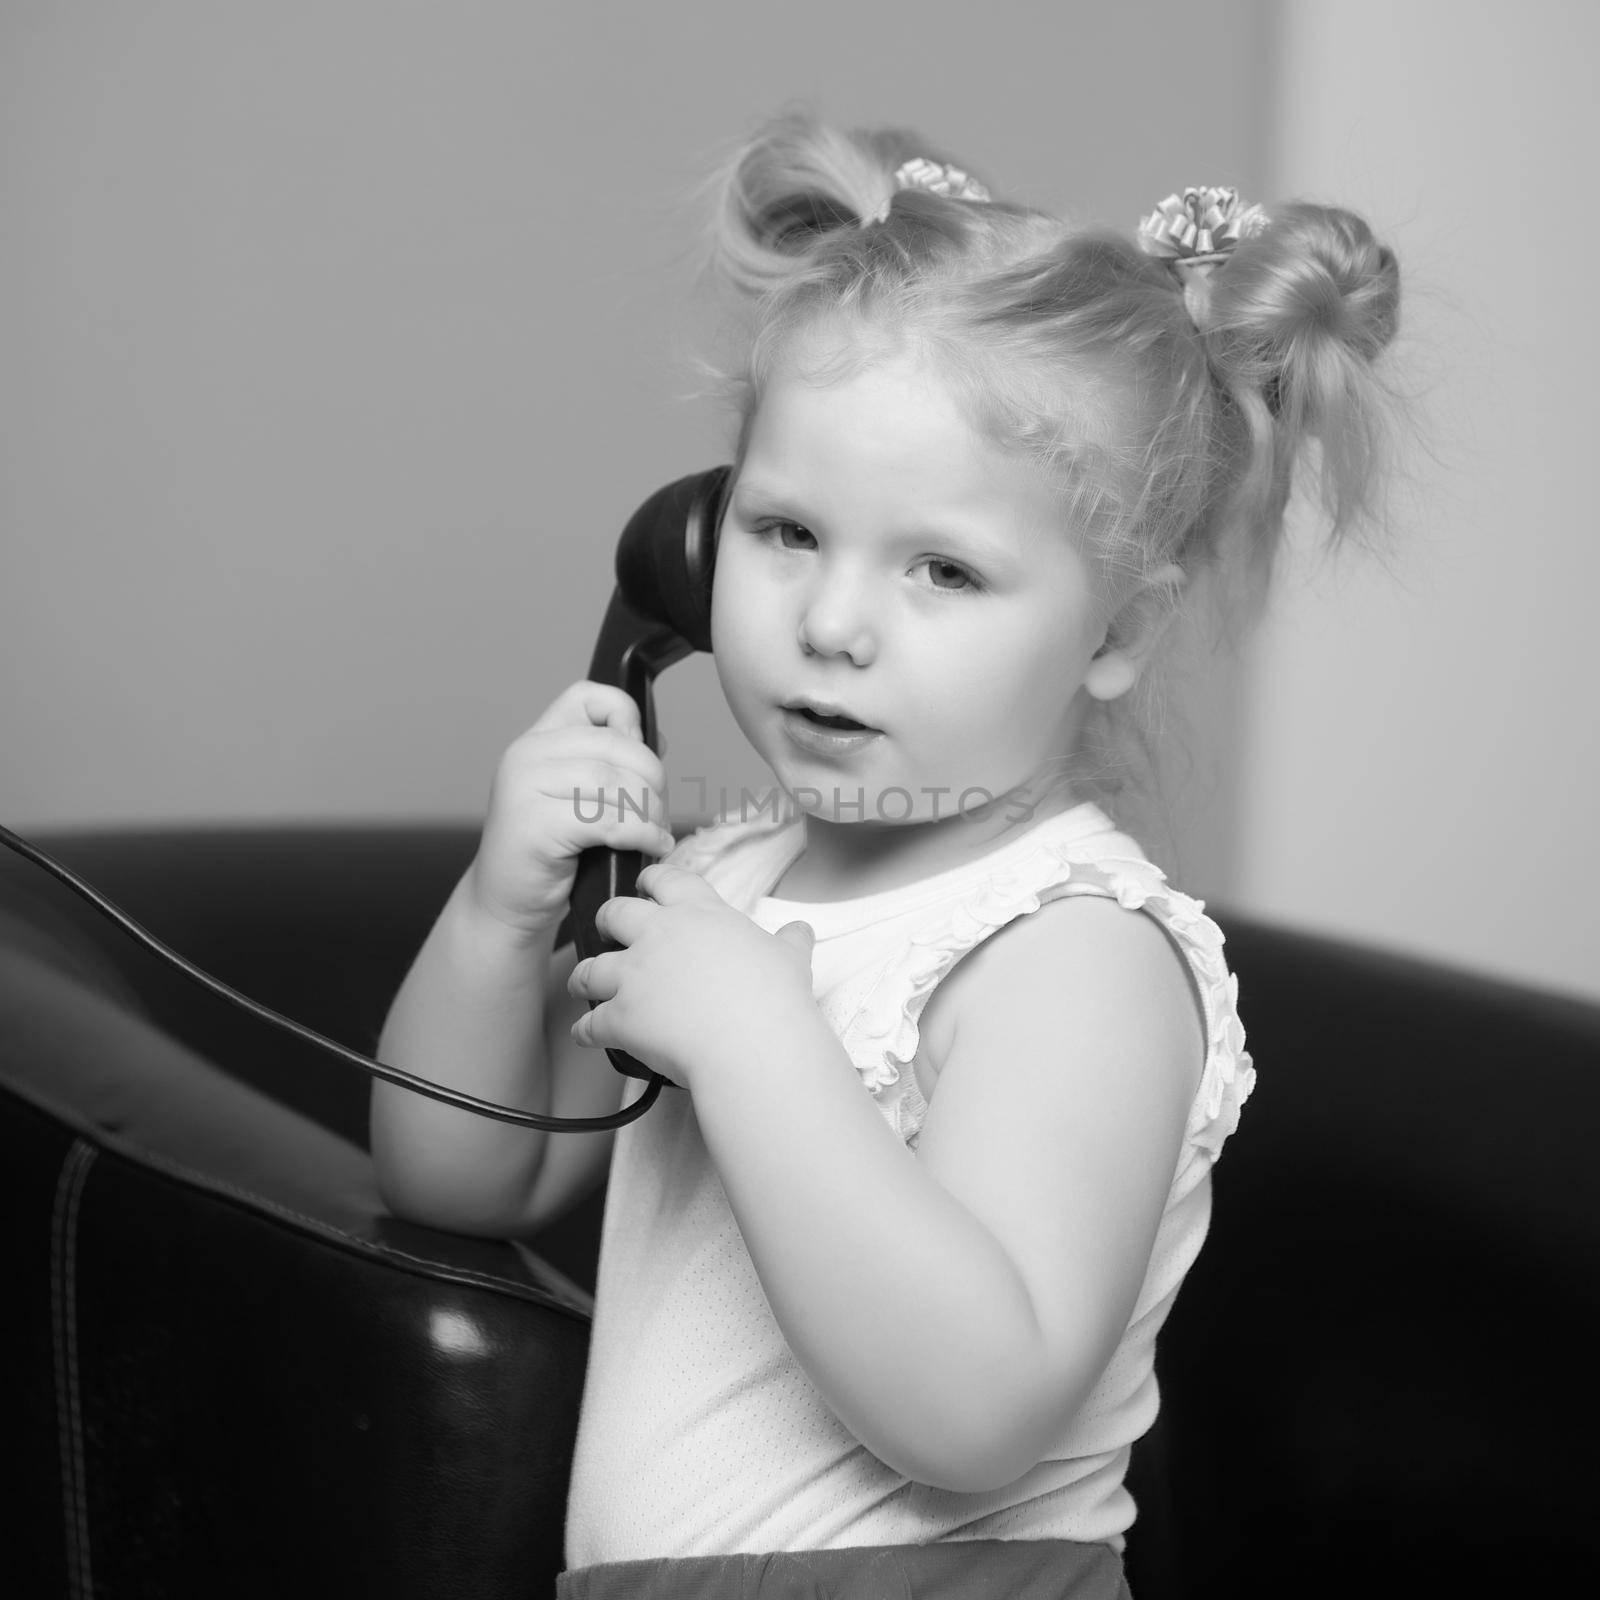 A little girl is ringing on the old phone. by kolesnikov_studio